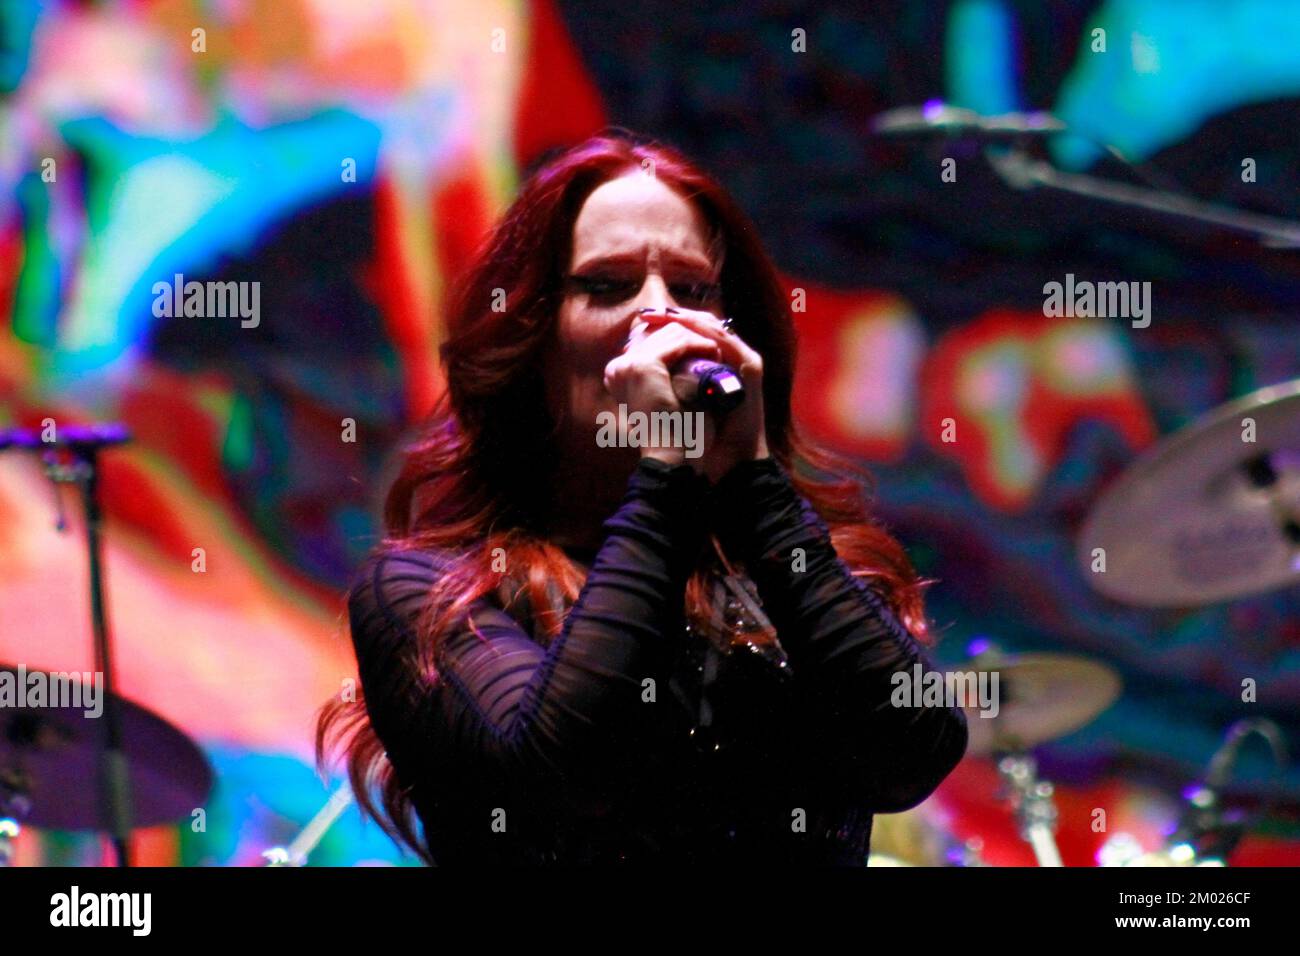 December 02, 2022, Toluca, Mexico: Simone Simons vocalist of Epica Dutch band, performs on the Hell stage during the Hell and Heaven Metal Fest at Pegasus forum. on December 2, 2022 in Toluca, Mexico. (Photo by Carlos Santiago/ Eyepix Group) (Photo by Eyepix/Sipa USA) Credit: Sipa USA/Alamy Live News Stock Photo